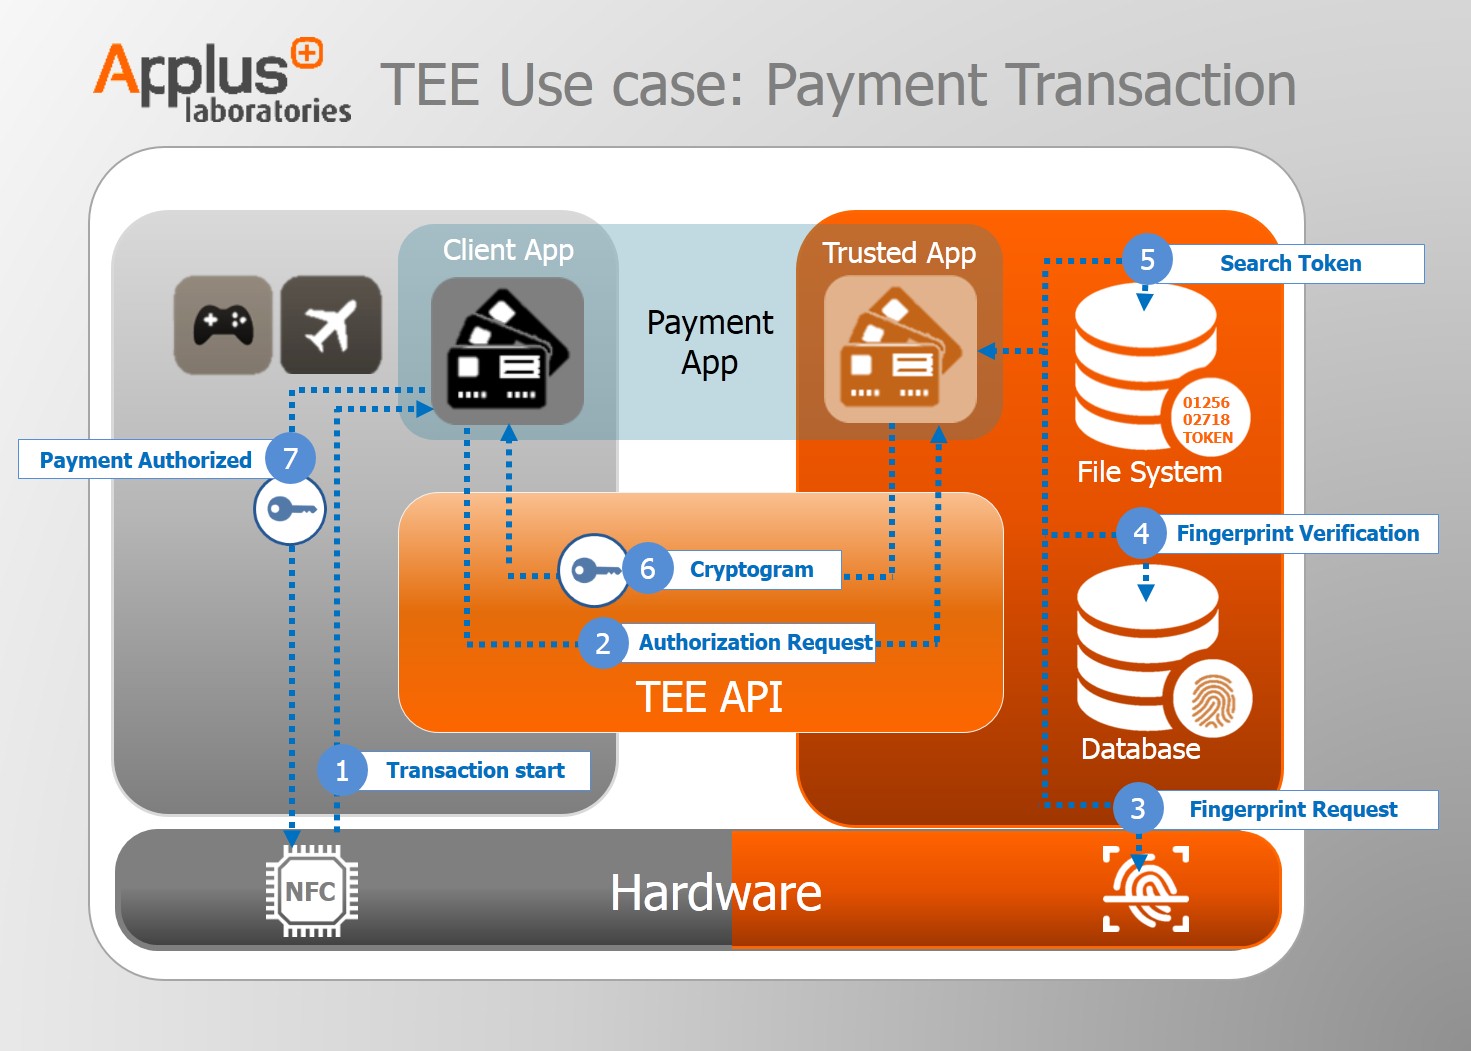 TEE Use Case - Payment Transaction